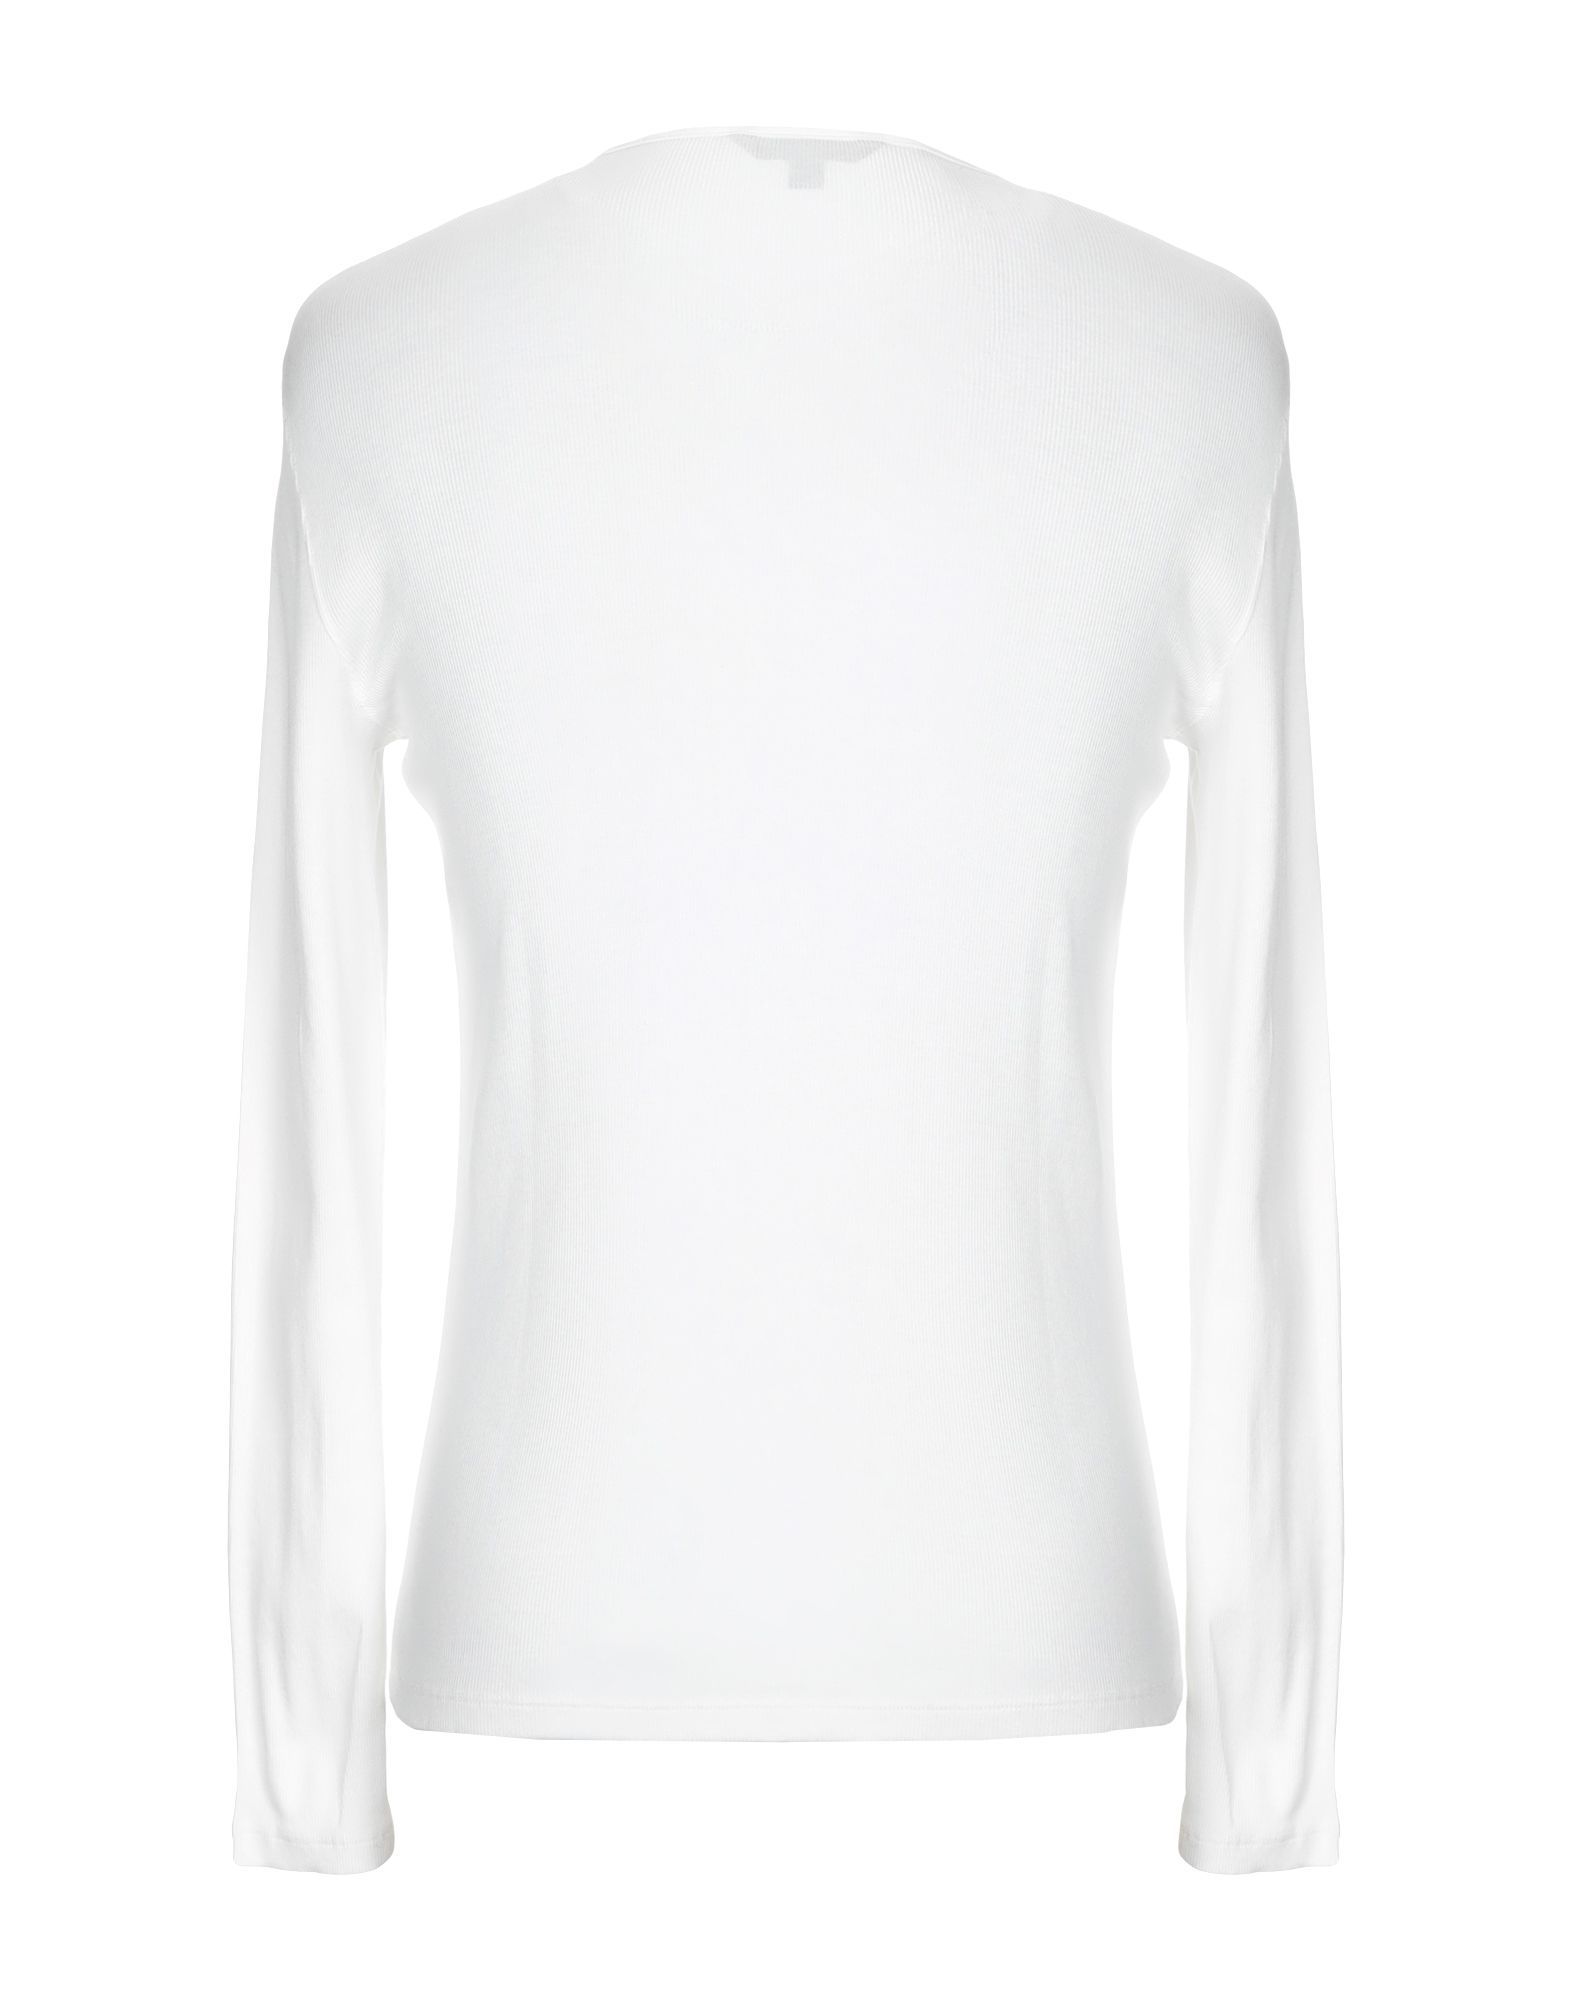 jersey, no appliqués, solid colour, round collar, long sleeves, no pockets, large sized